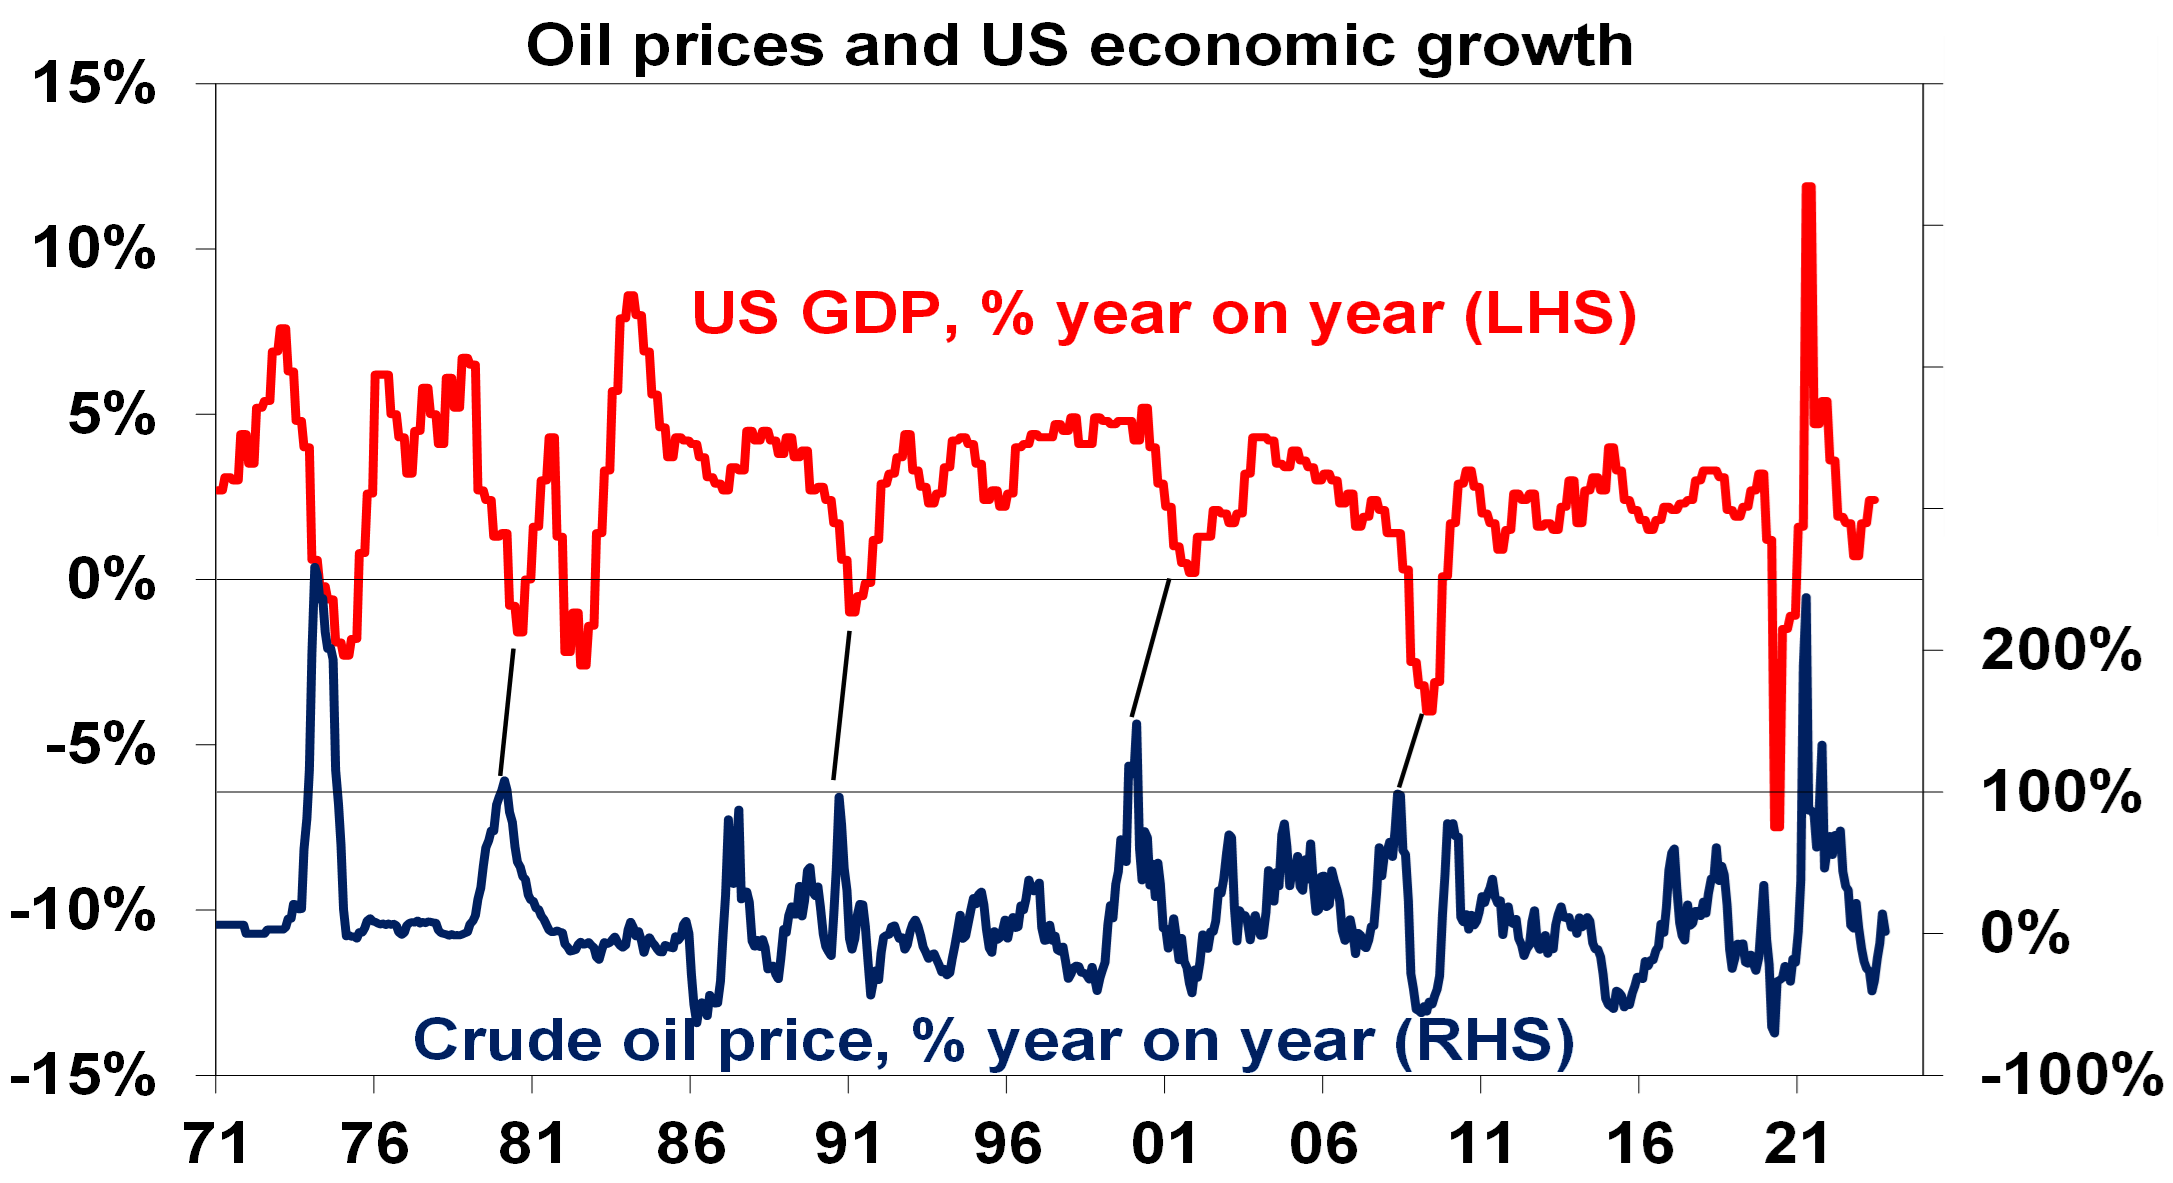 Oil prices and US economic growth